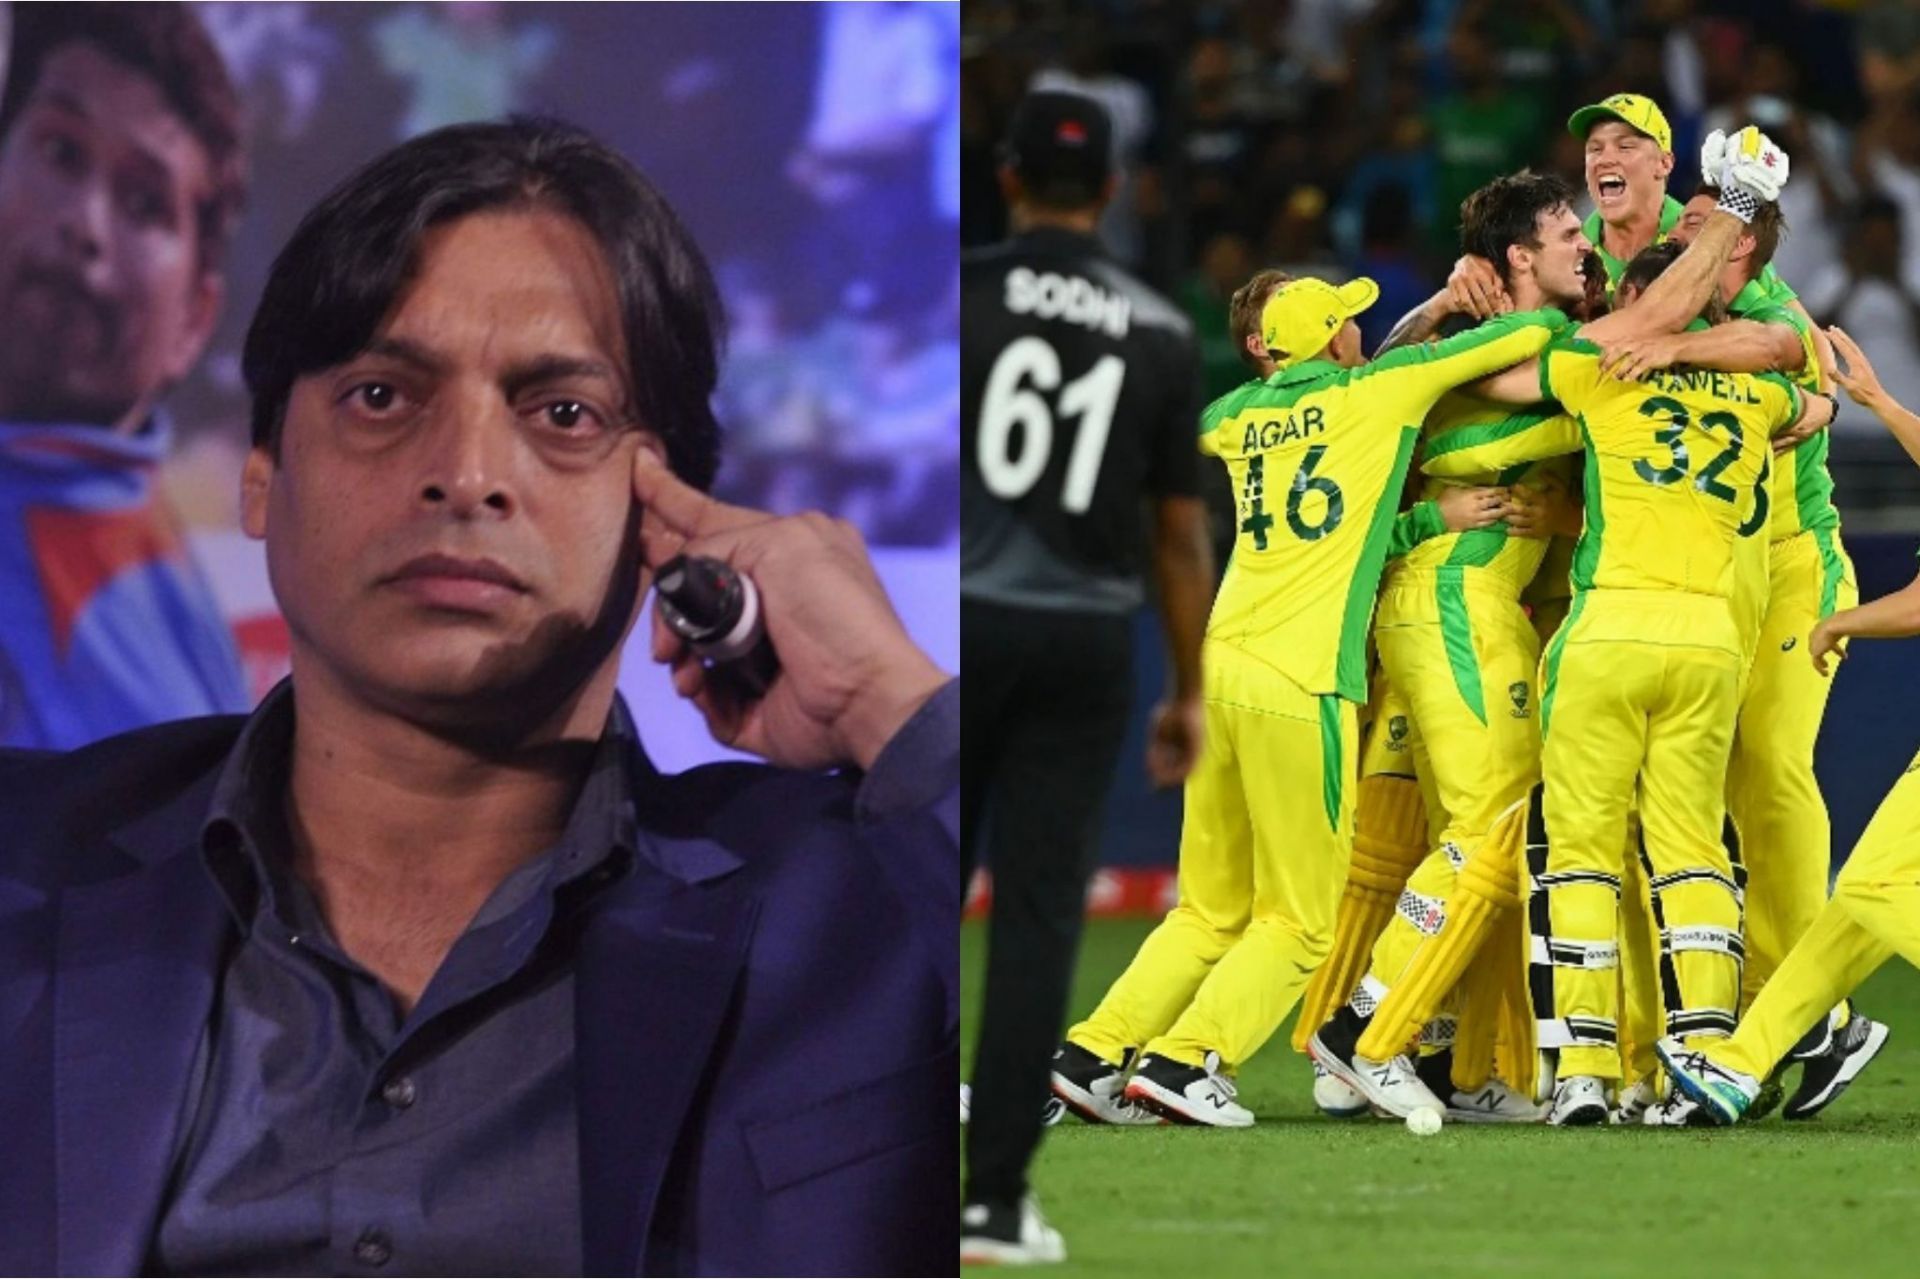 Shoaib Akhtar believes that Australia outclassed New Zealand in the T20 World Cup 2021 finals